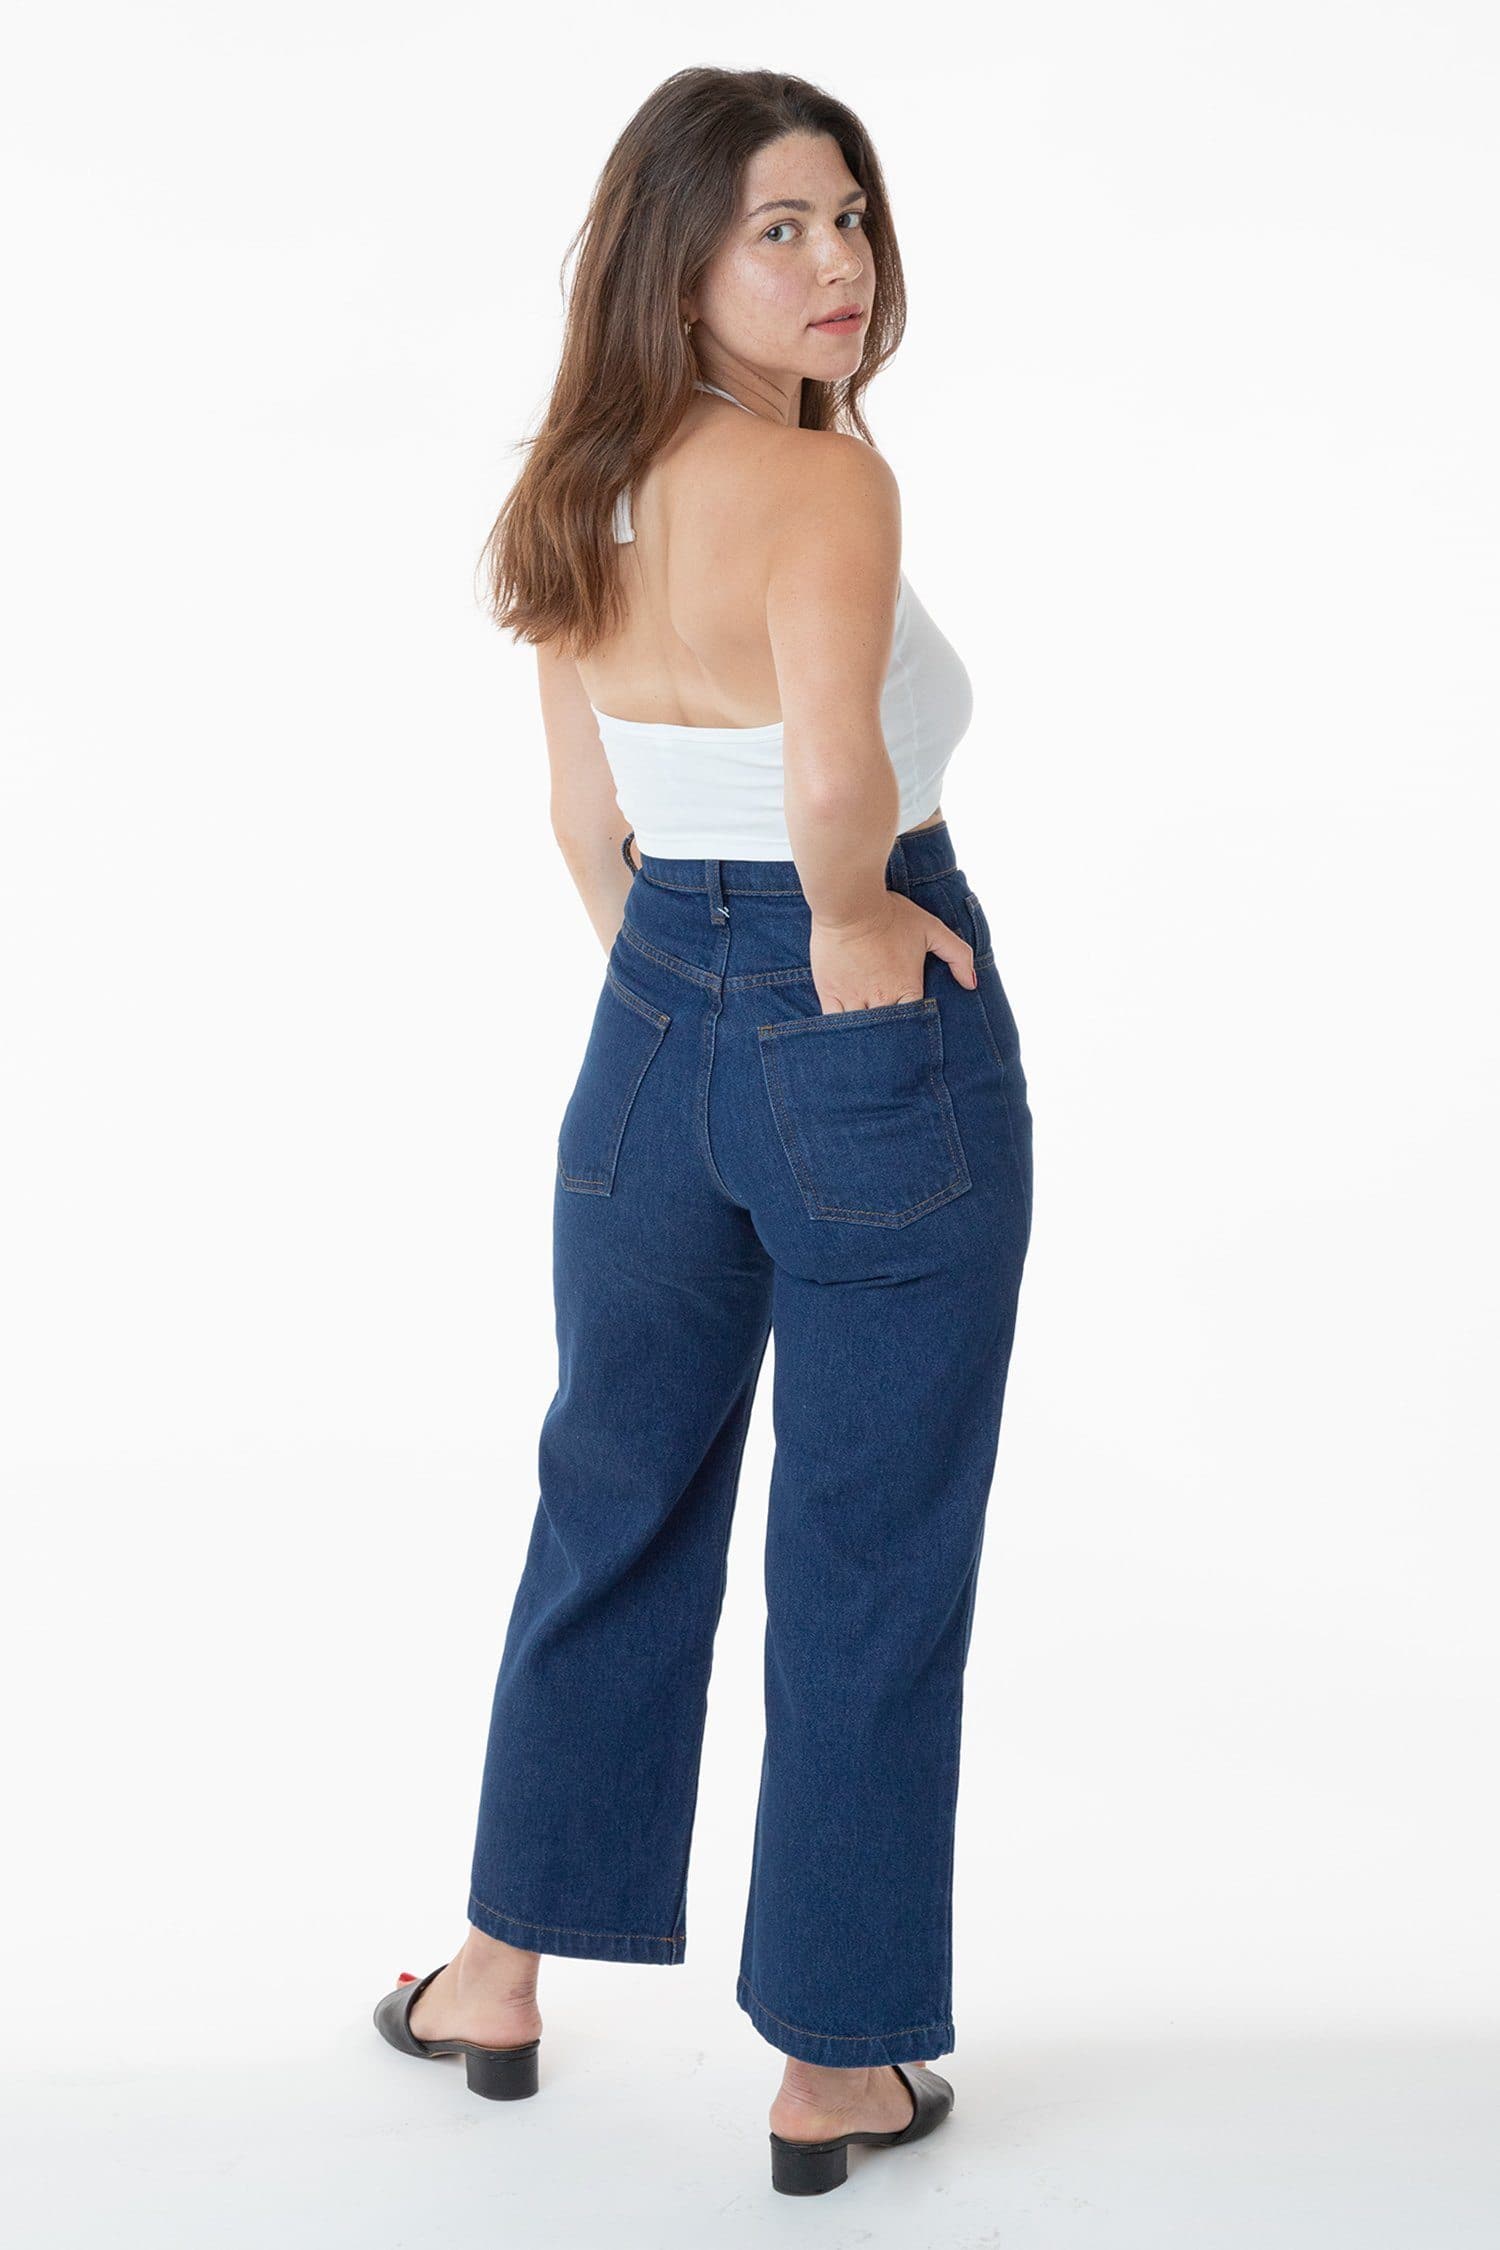 Low Impact High Rise Wide Leg Jean, Cleo